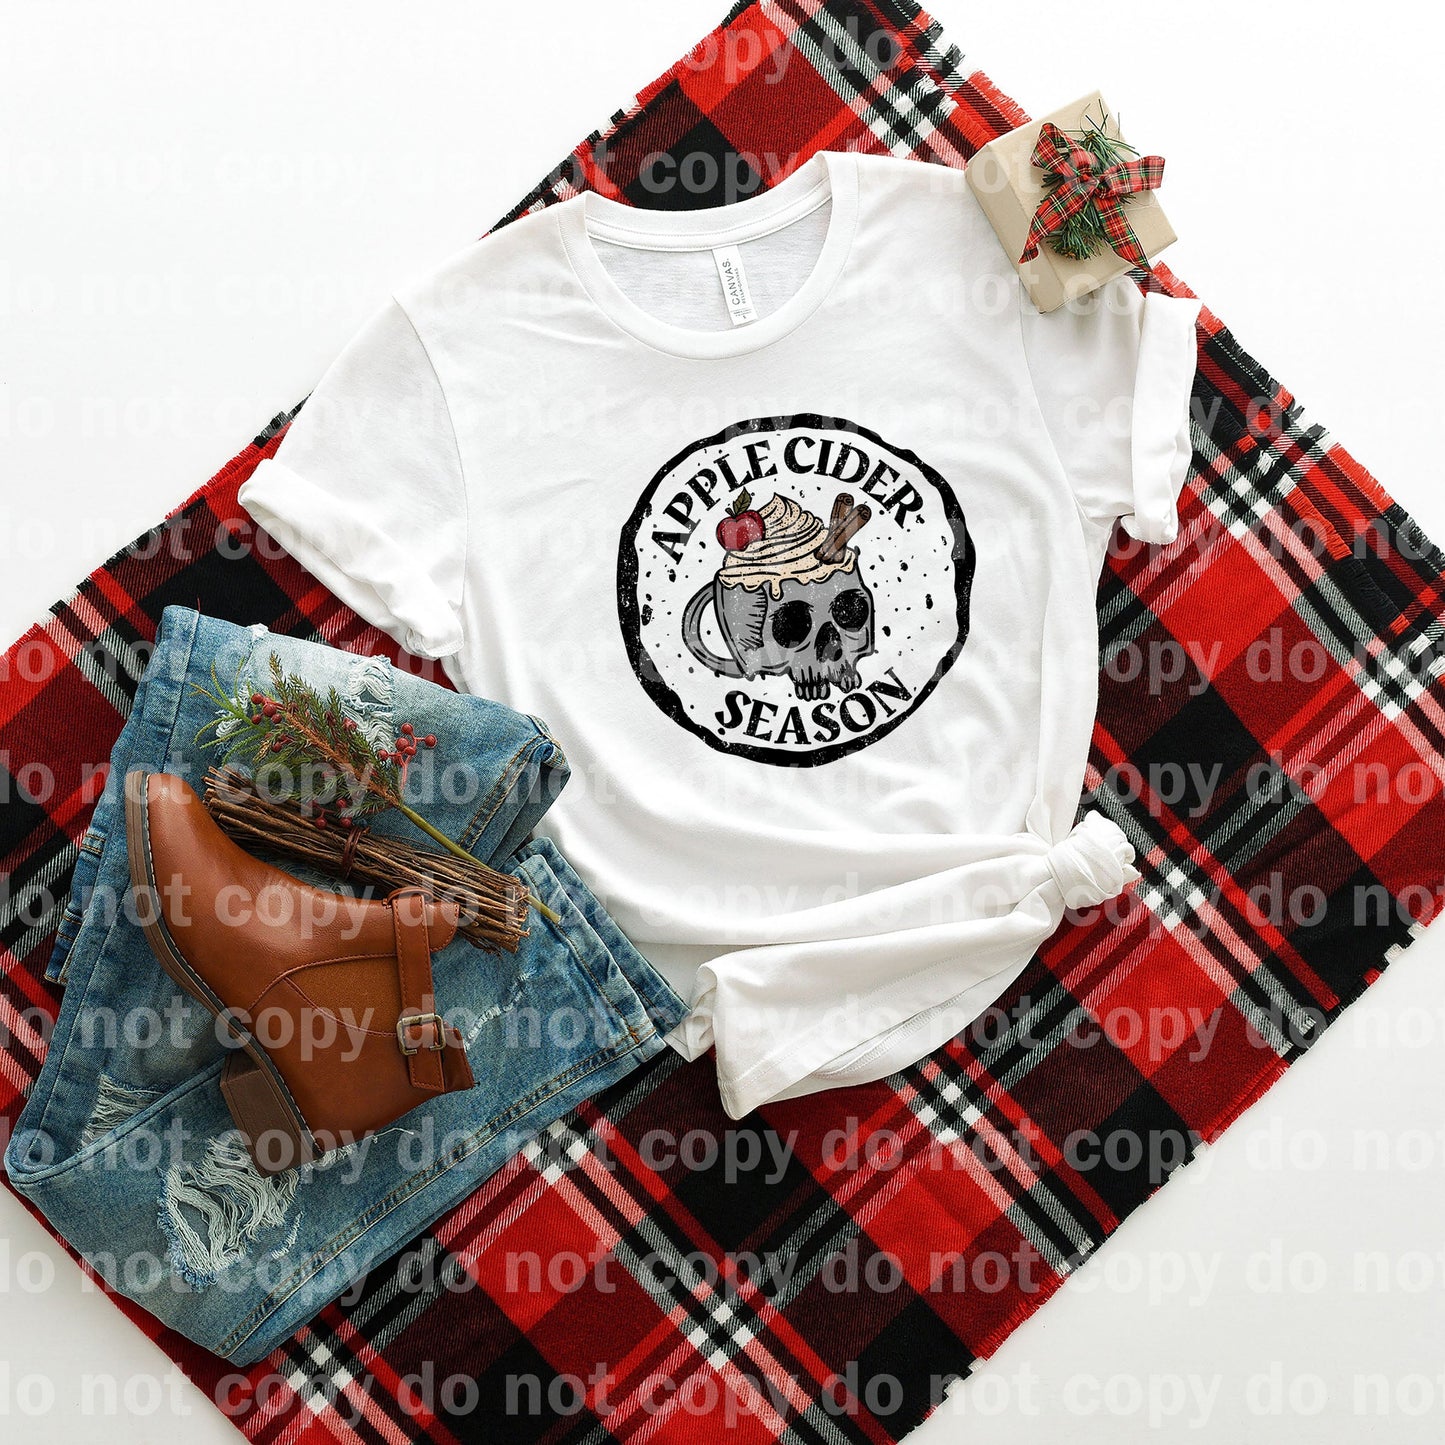 Apple Cider Season Distressed Full Color/One Color Dream Print or Sublimation Print